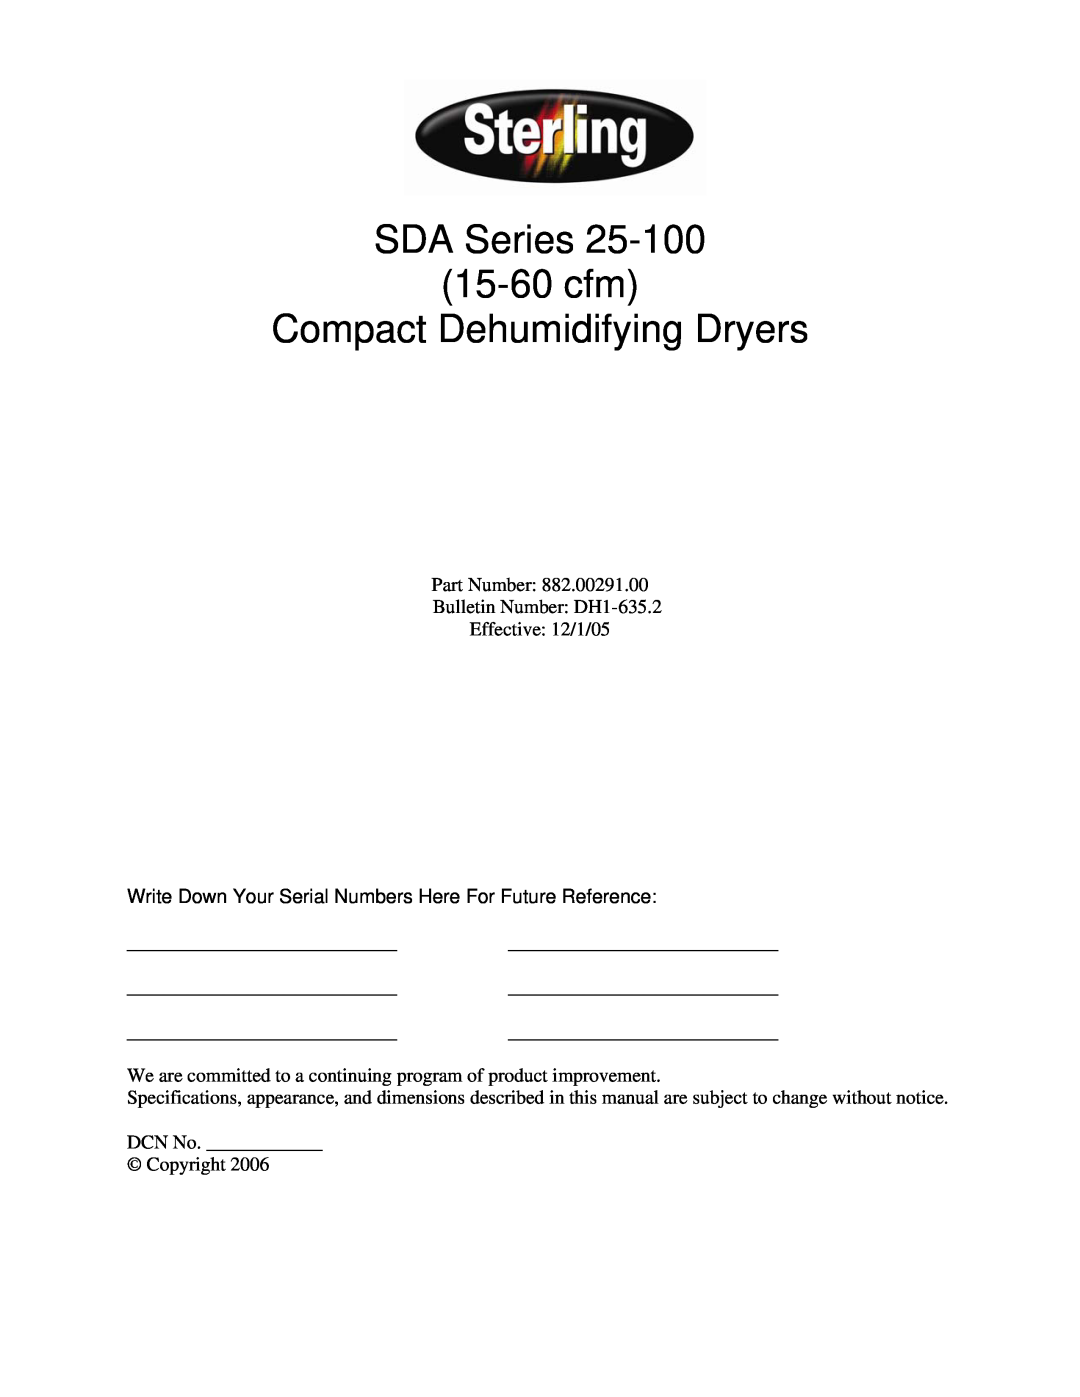 Sterling SDA Series 25-100 specifications SDA Series 15-60cfm Compact Dehumidifying Dryers 